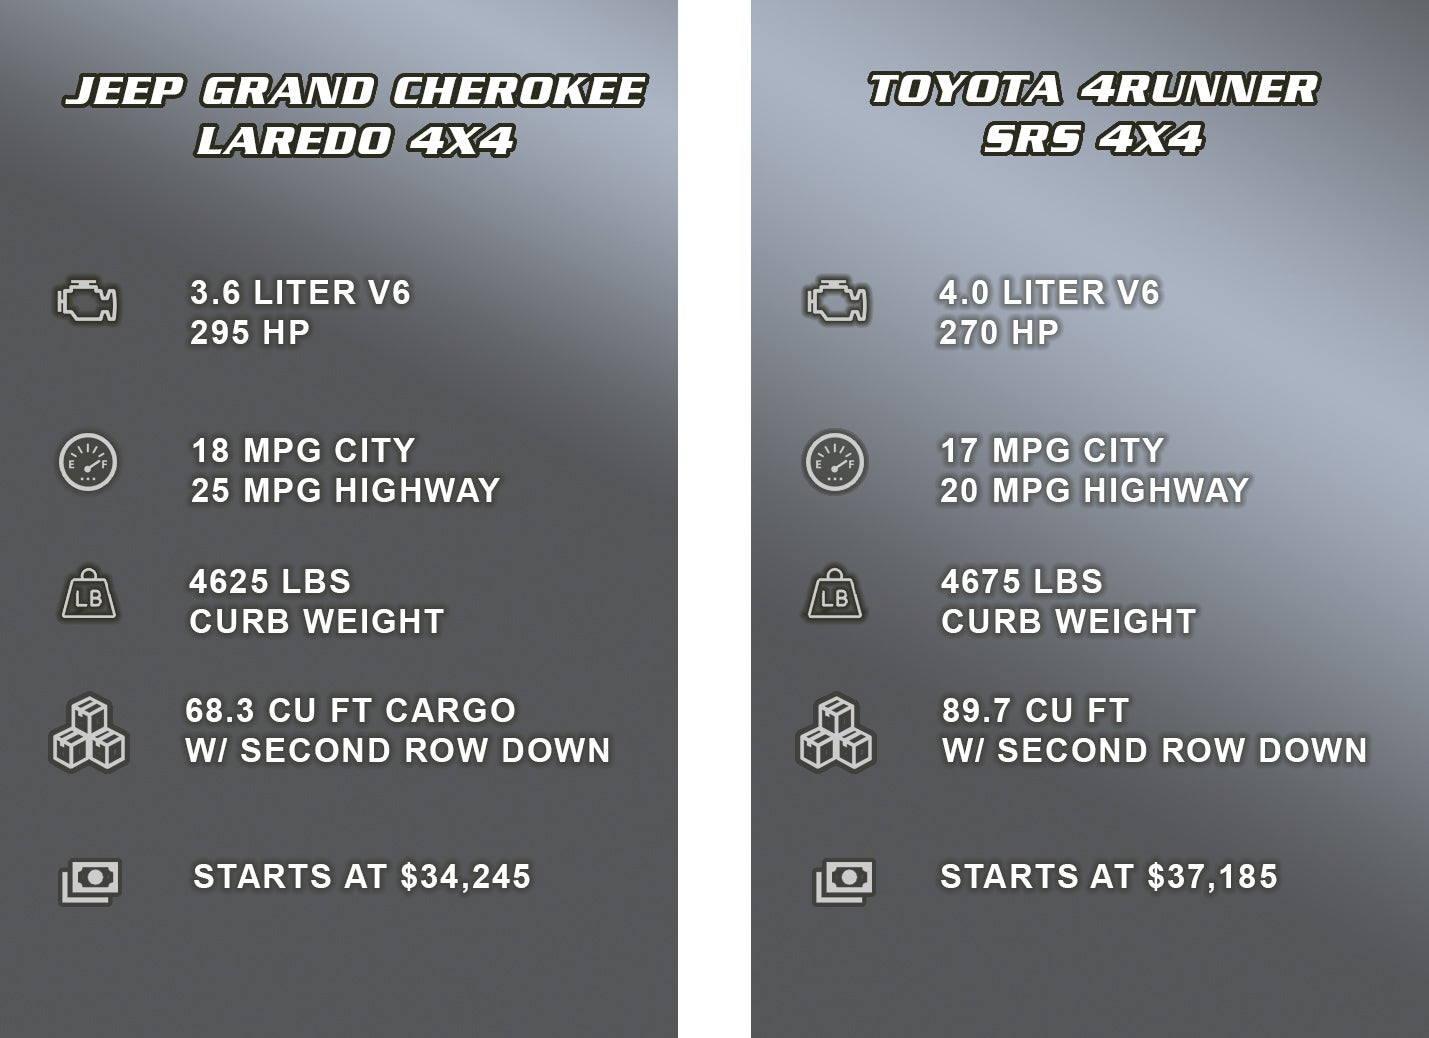 Jeep Grand Cherokee vs. Toyota 4Runner at Benna Chrysler Dodge Jeep Ram in Superior, WI